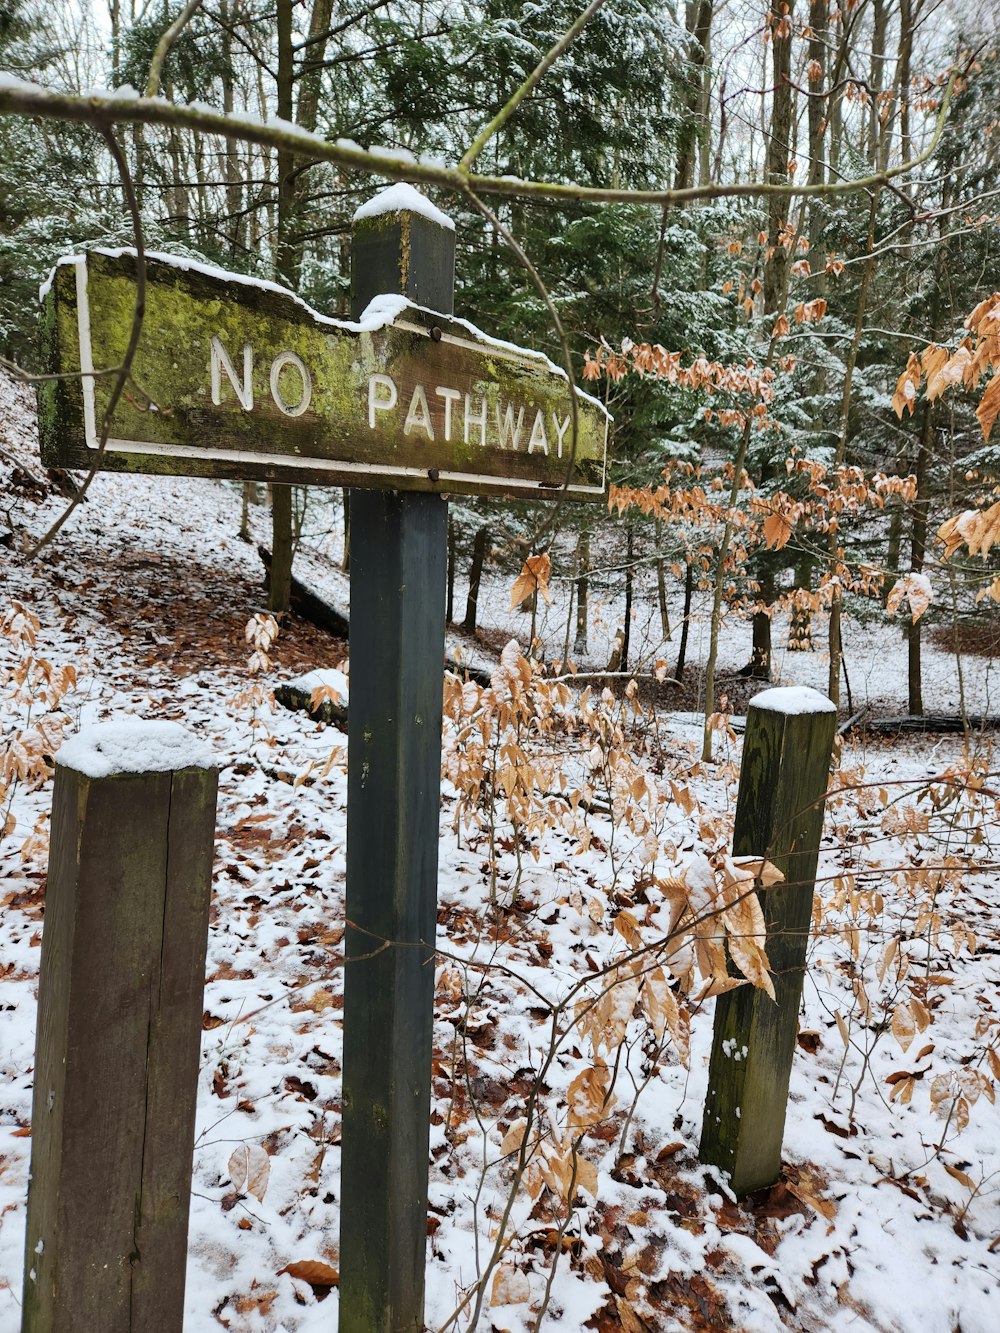 a no pathway sign in the woods covered in snow